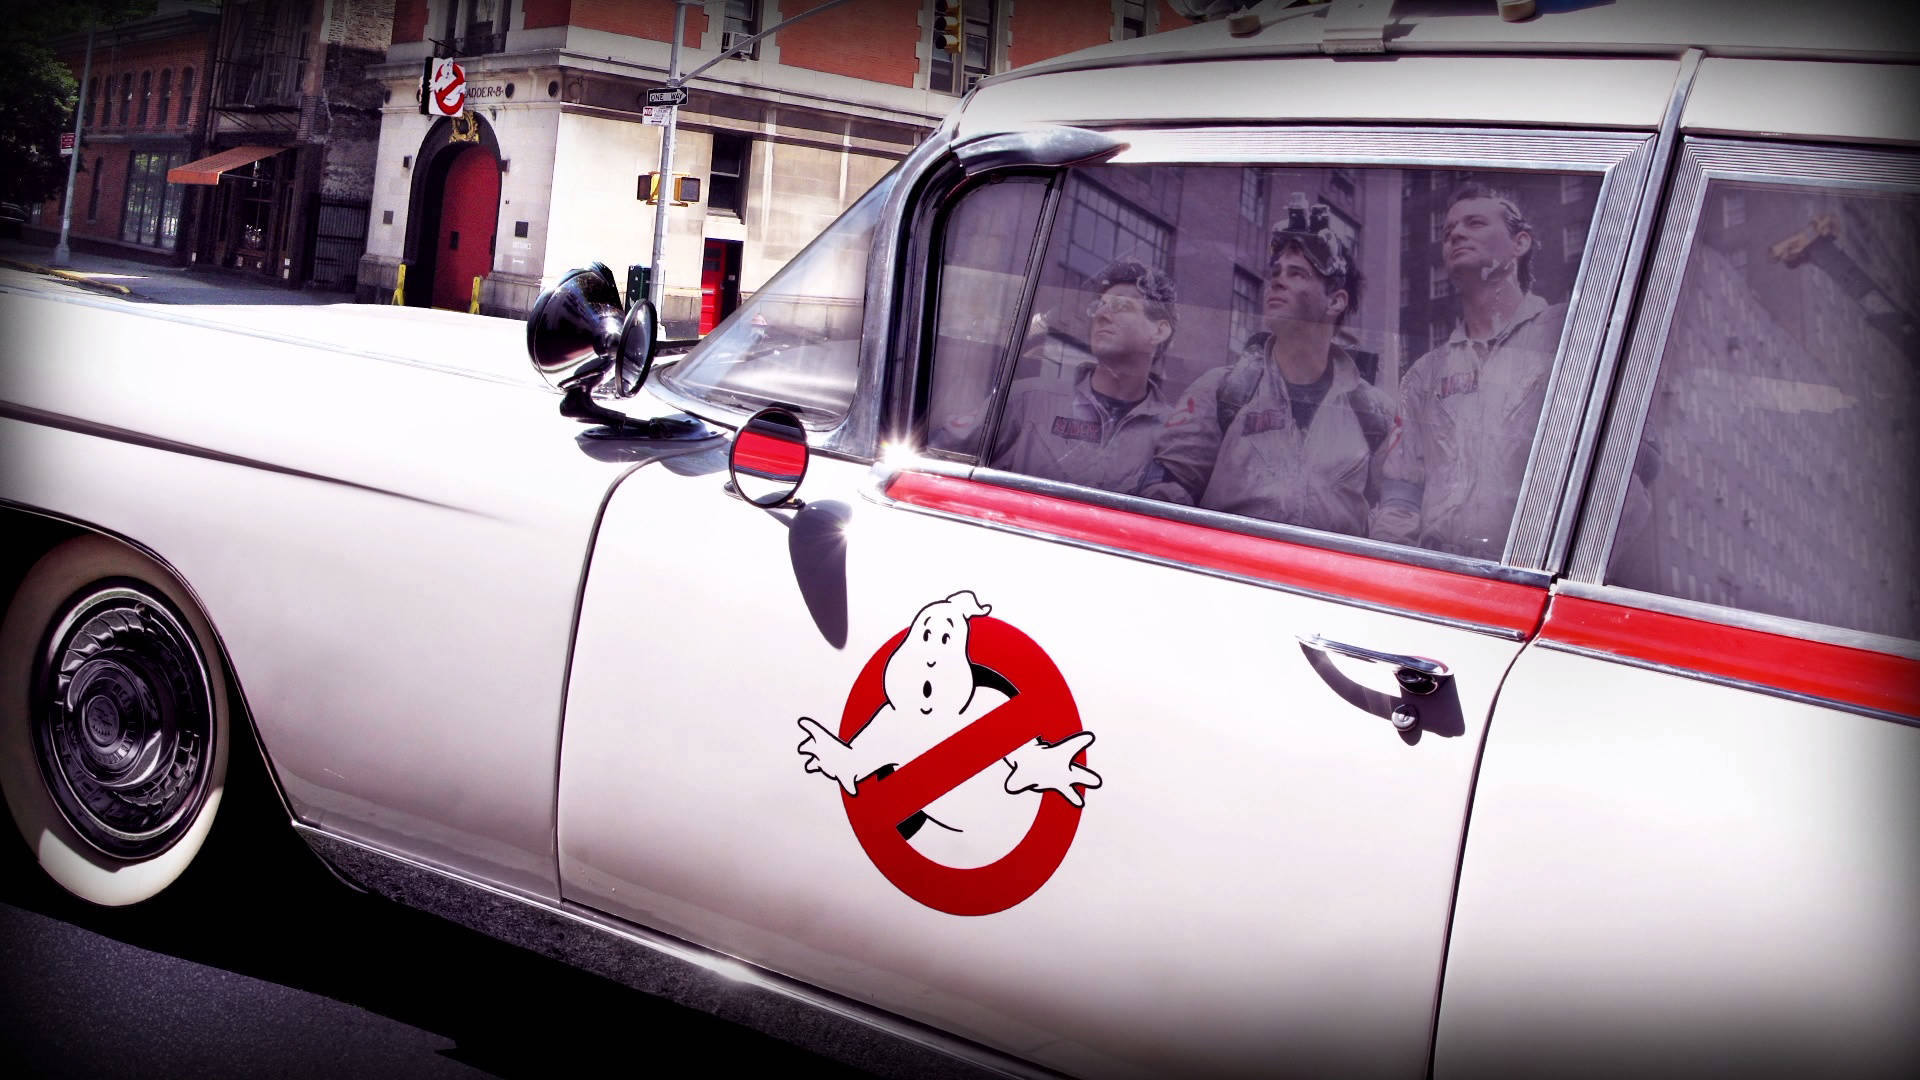 Ready To Take On The Scary Ghosts And Ghouls: The Classic Ghostbusters Ecto-mobile! Background